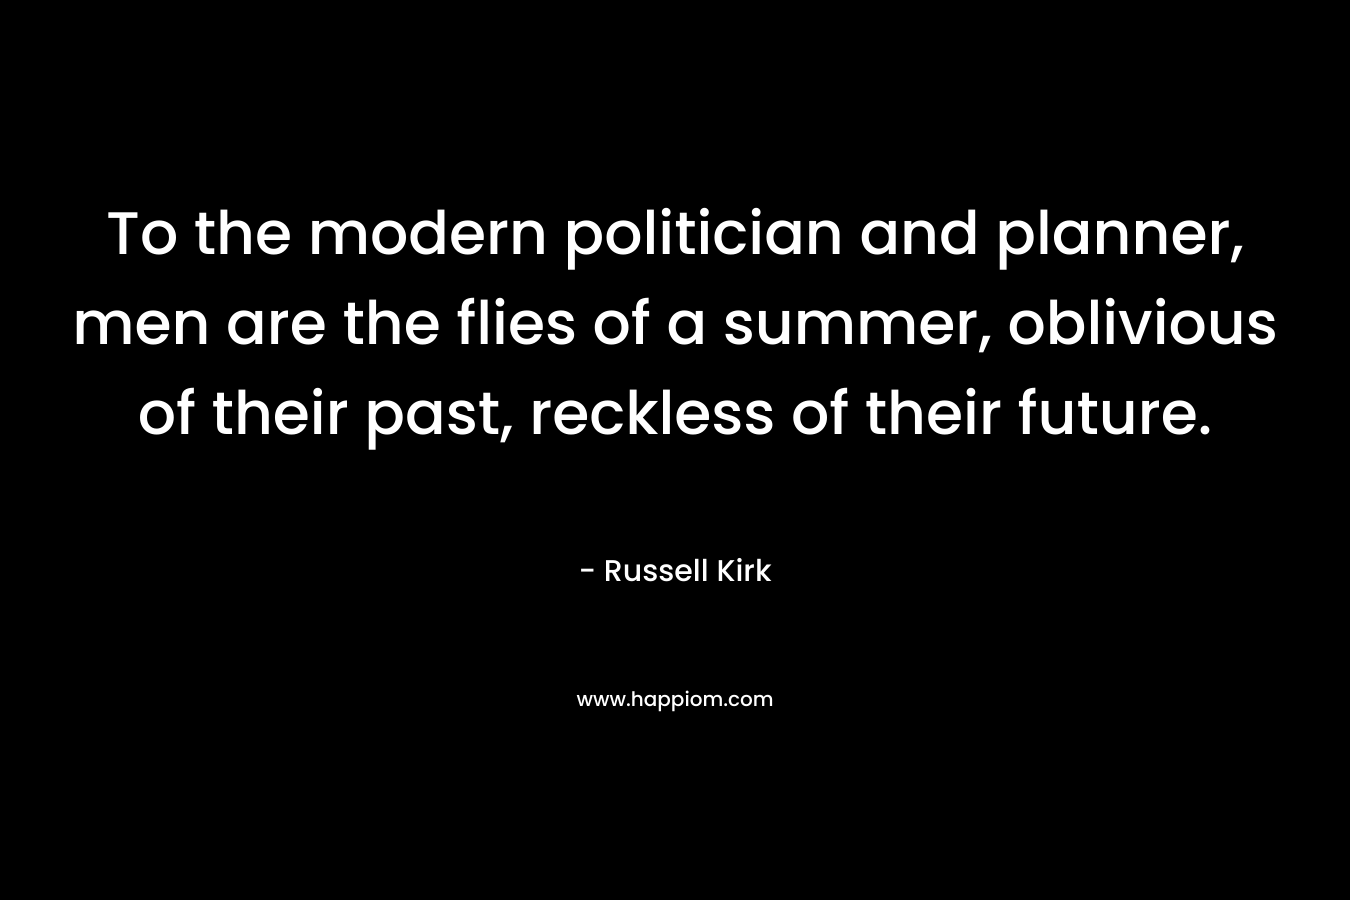 To the modern politician and planner, men are the flies of a summer, oblivious of their past, reckless of their future.